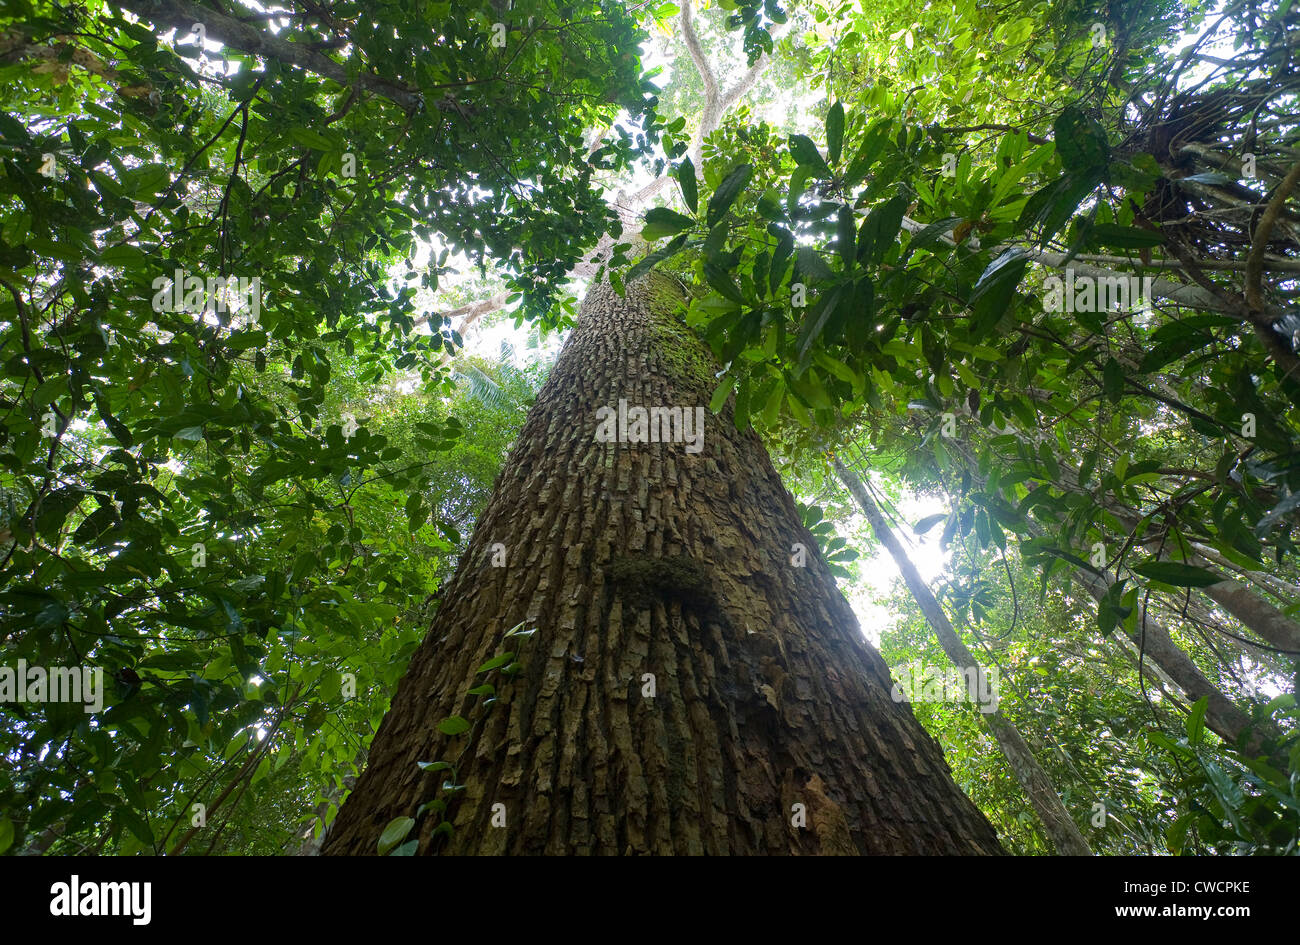 BRAZIL NUT TREE (Bertholletia excelsa) in primary rainforest, Iwokrama forest forest reserve, Guyana, South America. Stock Photo